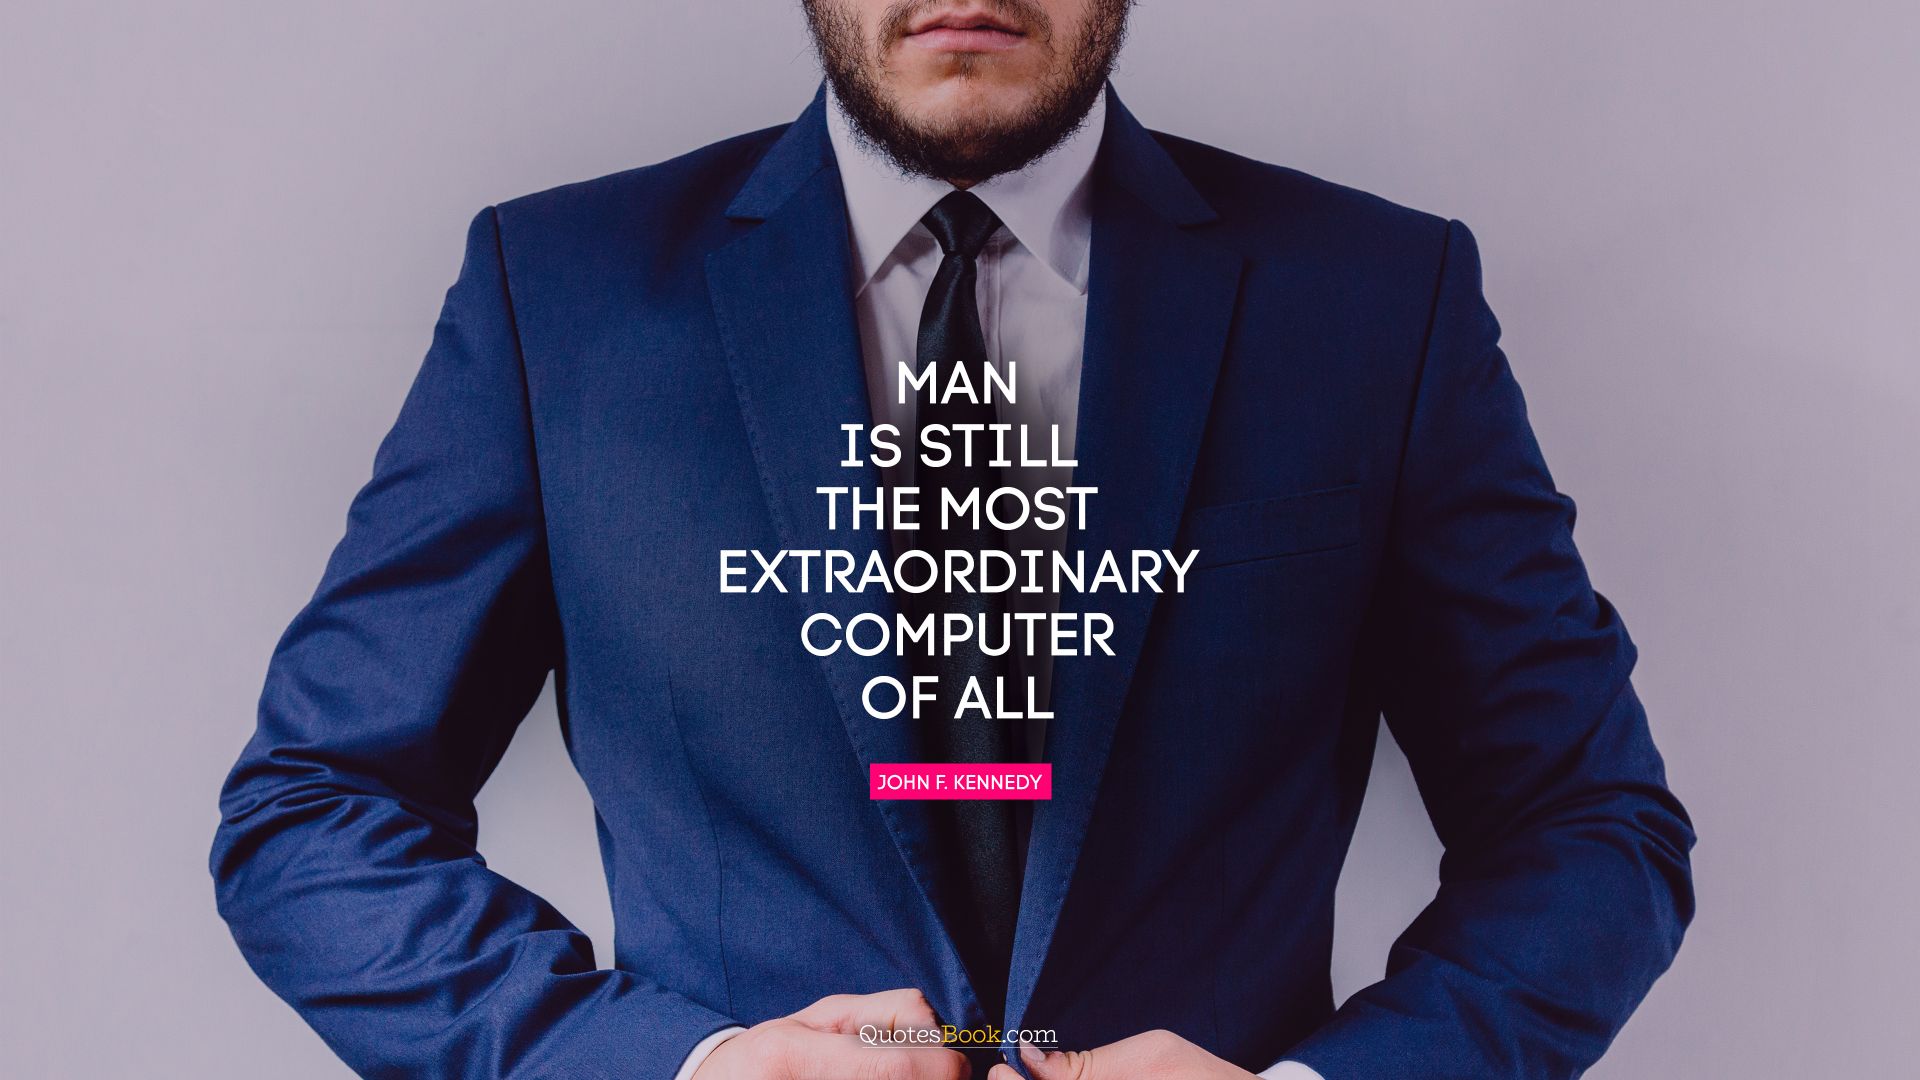 Man is still the most extraordinary computer of all. - Quote by John F. Kennedy